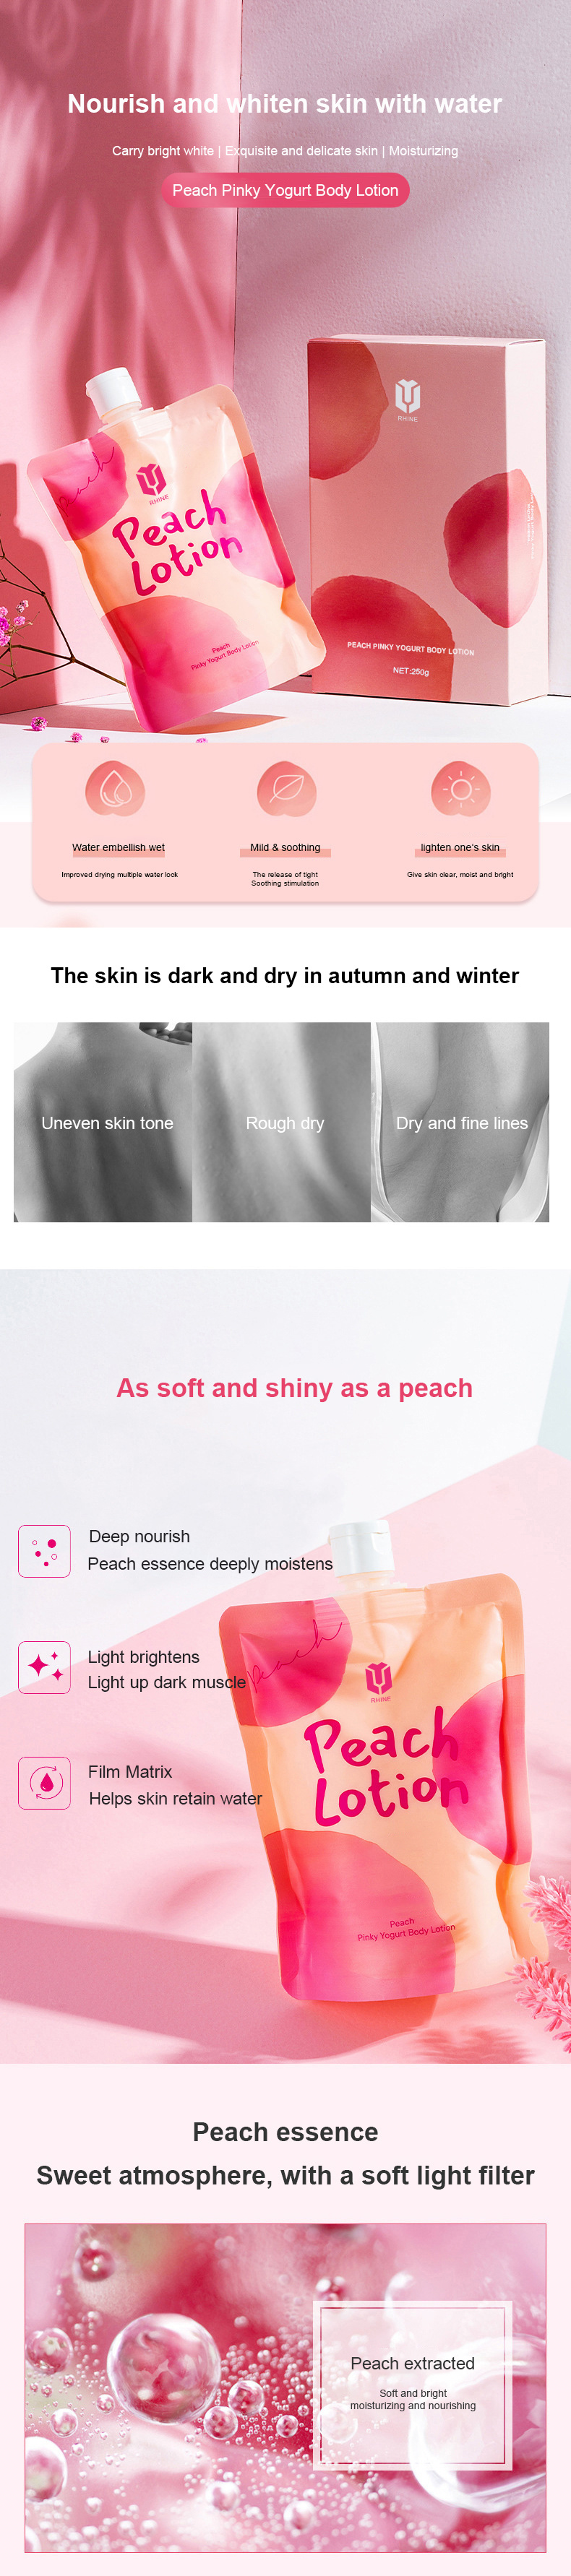 Private Label Body Care Products Best Day Cream for Oily Skin Winter Cream for Dry Skin